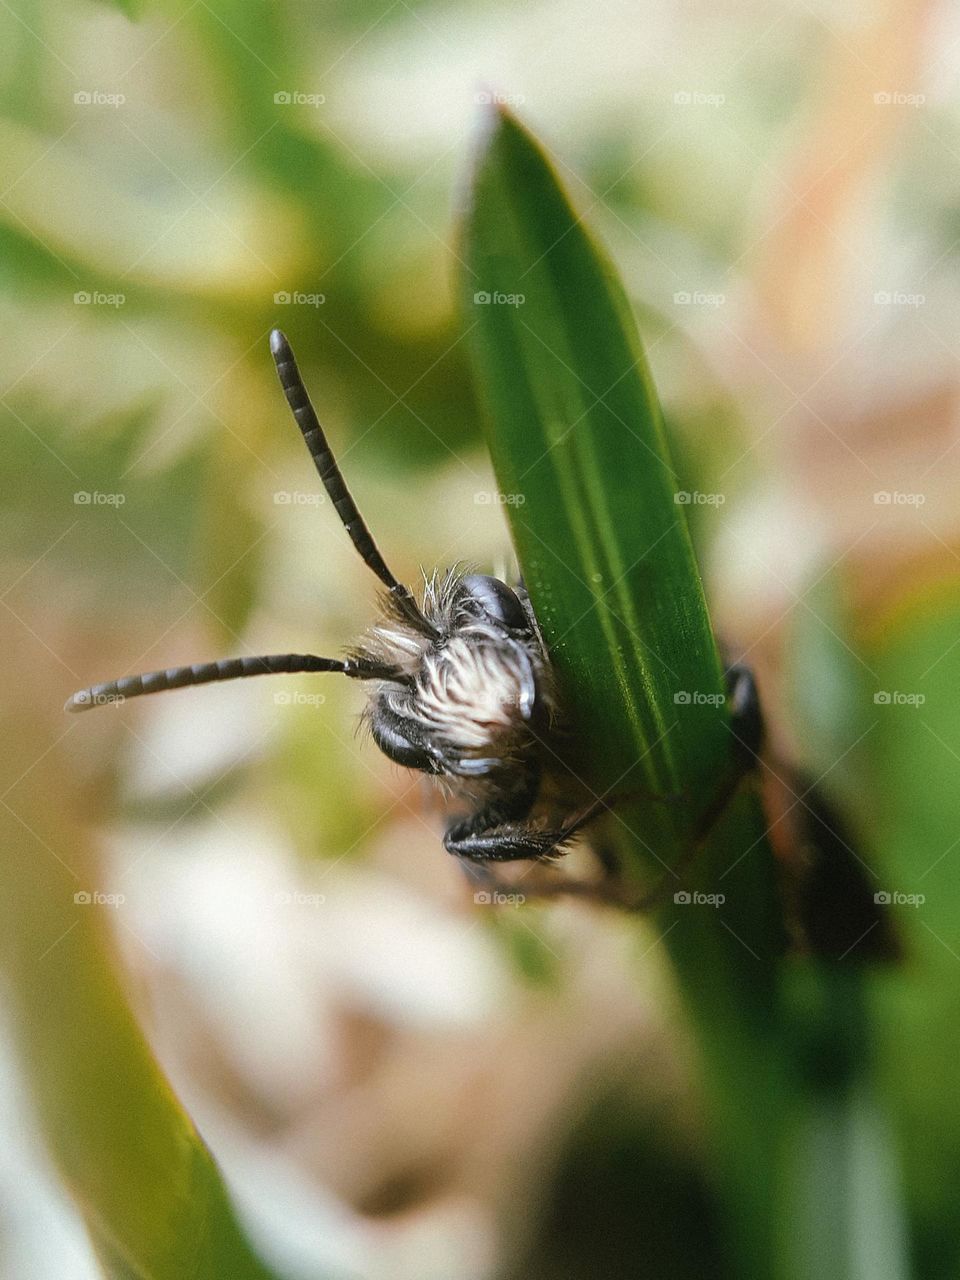 A macro photo of an insect's face among the grass